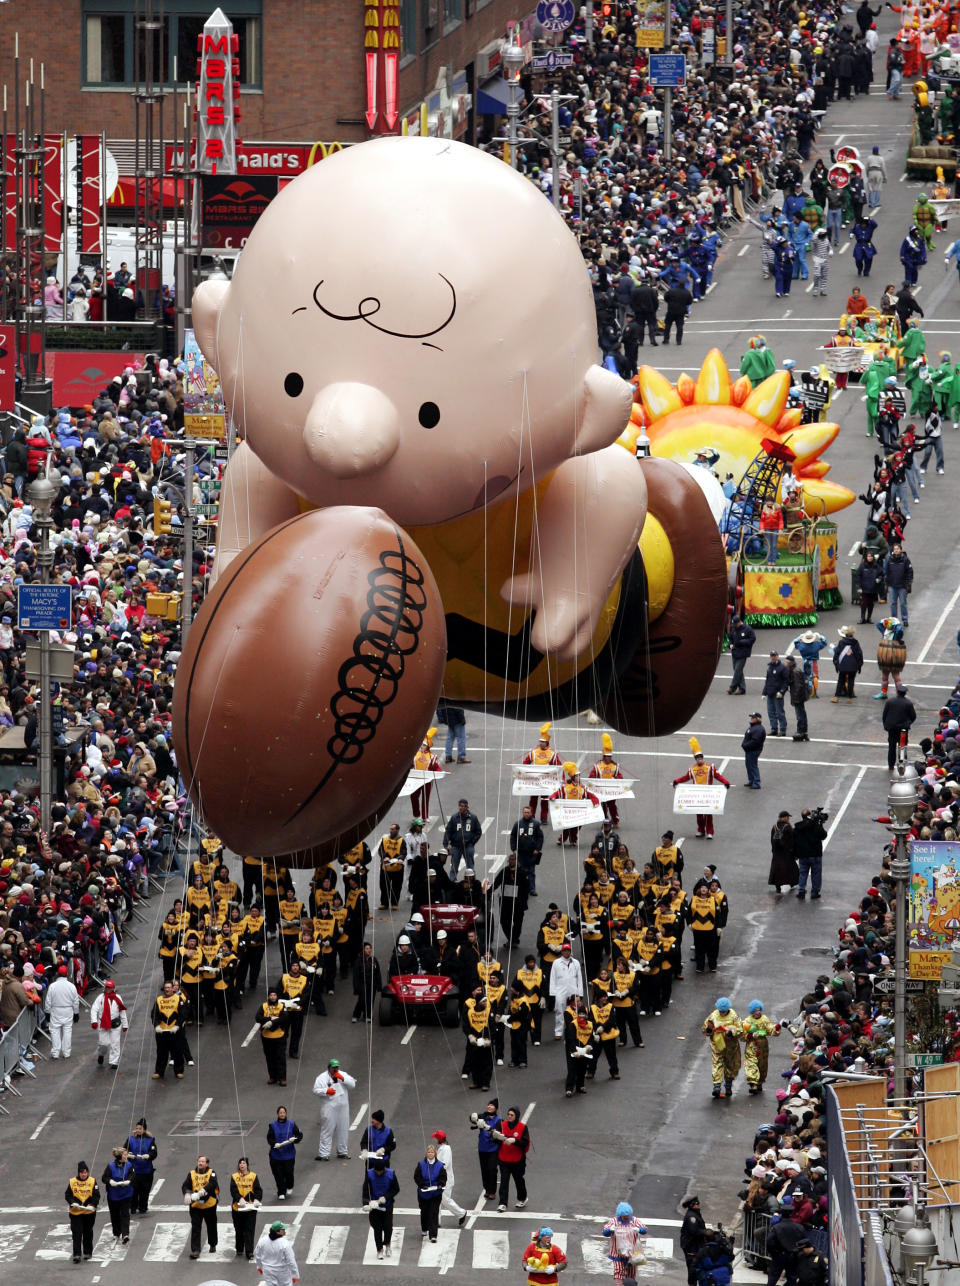 FILE - This Nov. 24, 2005 file photo shows a balloon of Peanuts character Charlie Brown chasing a football down Broadway during the Macy's Thanksgiving Day parade in New York. The parade has to be a crowd-pleaser for a multigenerational crowd. More than 3 million people typically attend the event that also unfolds in front of a TV audience of 50 million. This year's parade will feature balloons include Papa Smurf and the Elf on a Shelf, while Buzz Lightyear, Sailor Mickey Mouse and the Pillsbury Doughboy keep their place in the lineup. A new version of Hello Kitty is also to be included. (AP Photo/Jeff Christensen, file)